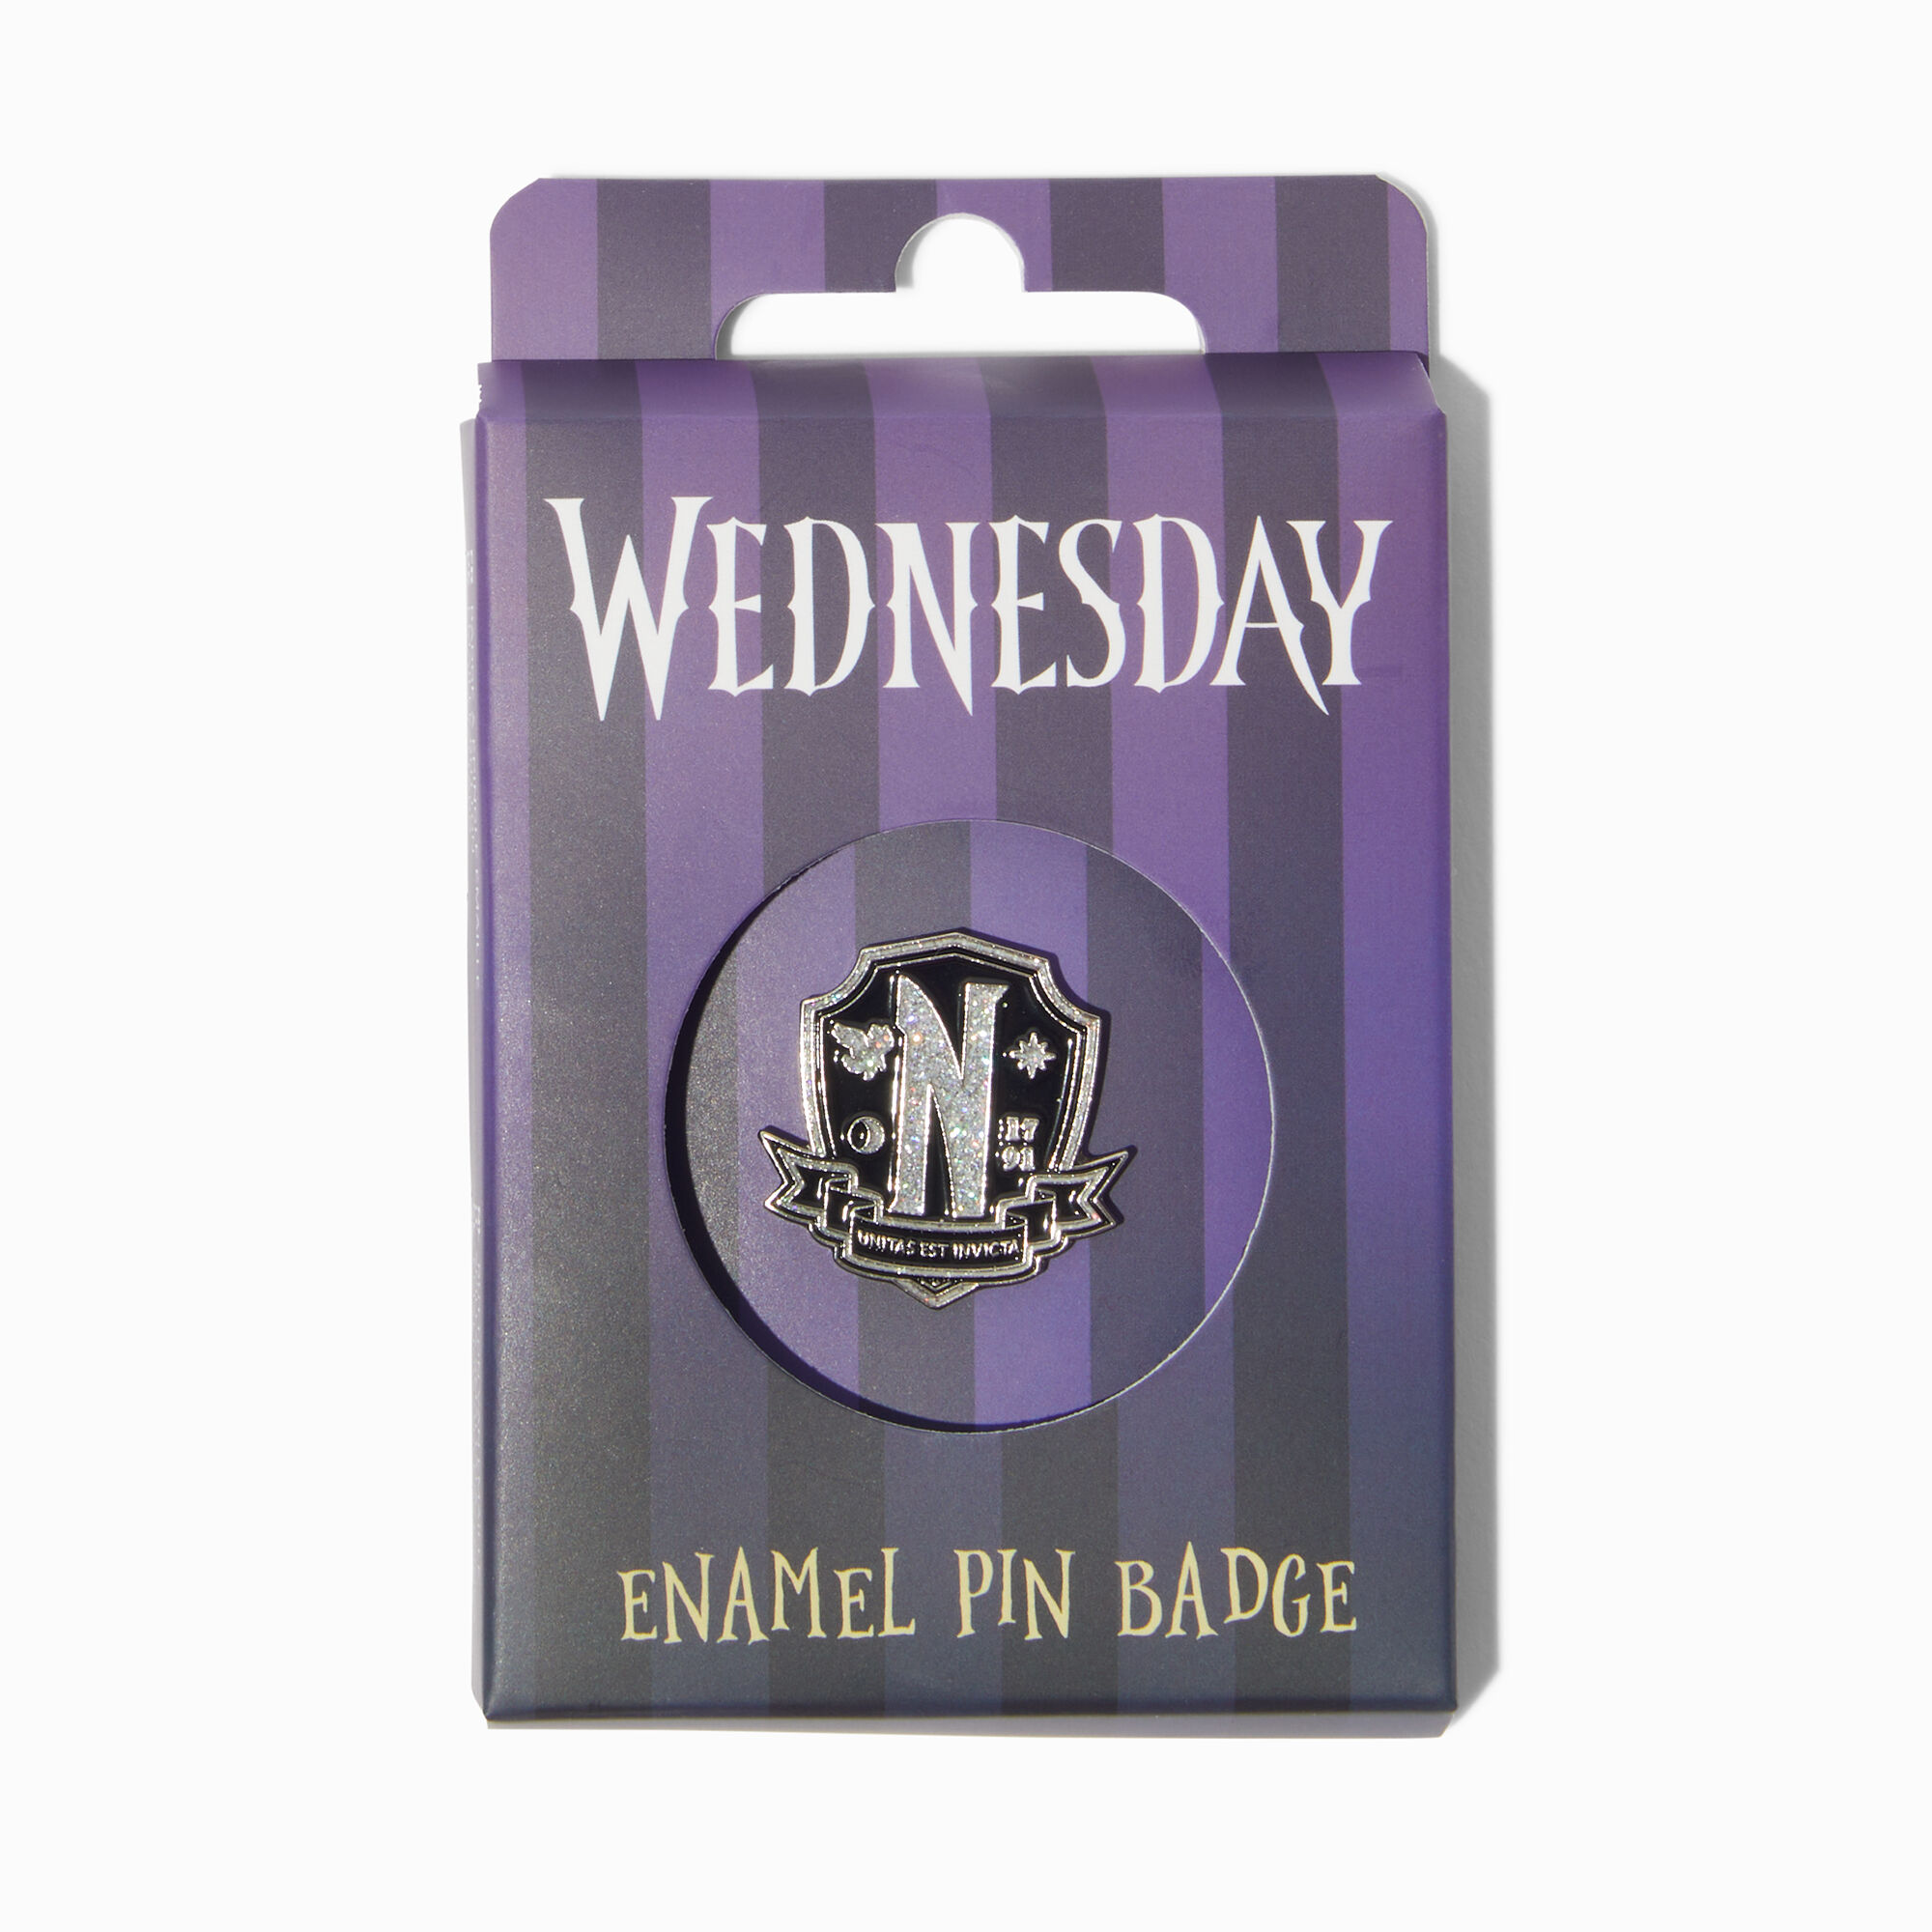 View Claires Wednesday Nevermore Enamel Pin Badge information